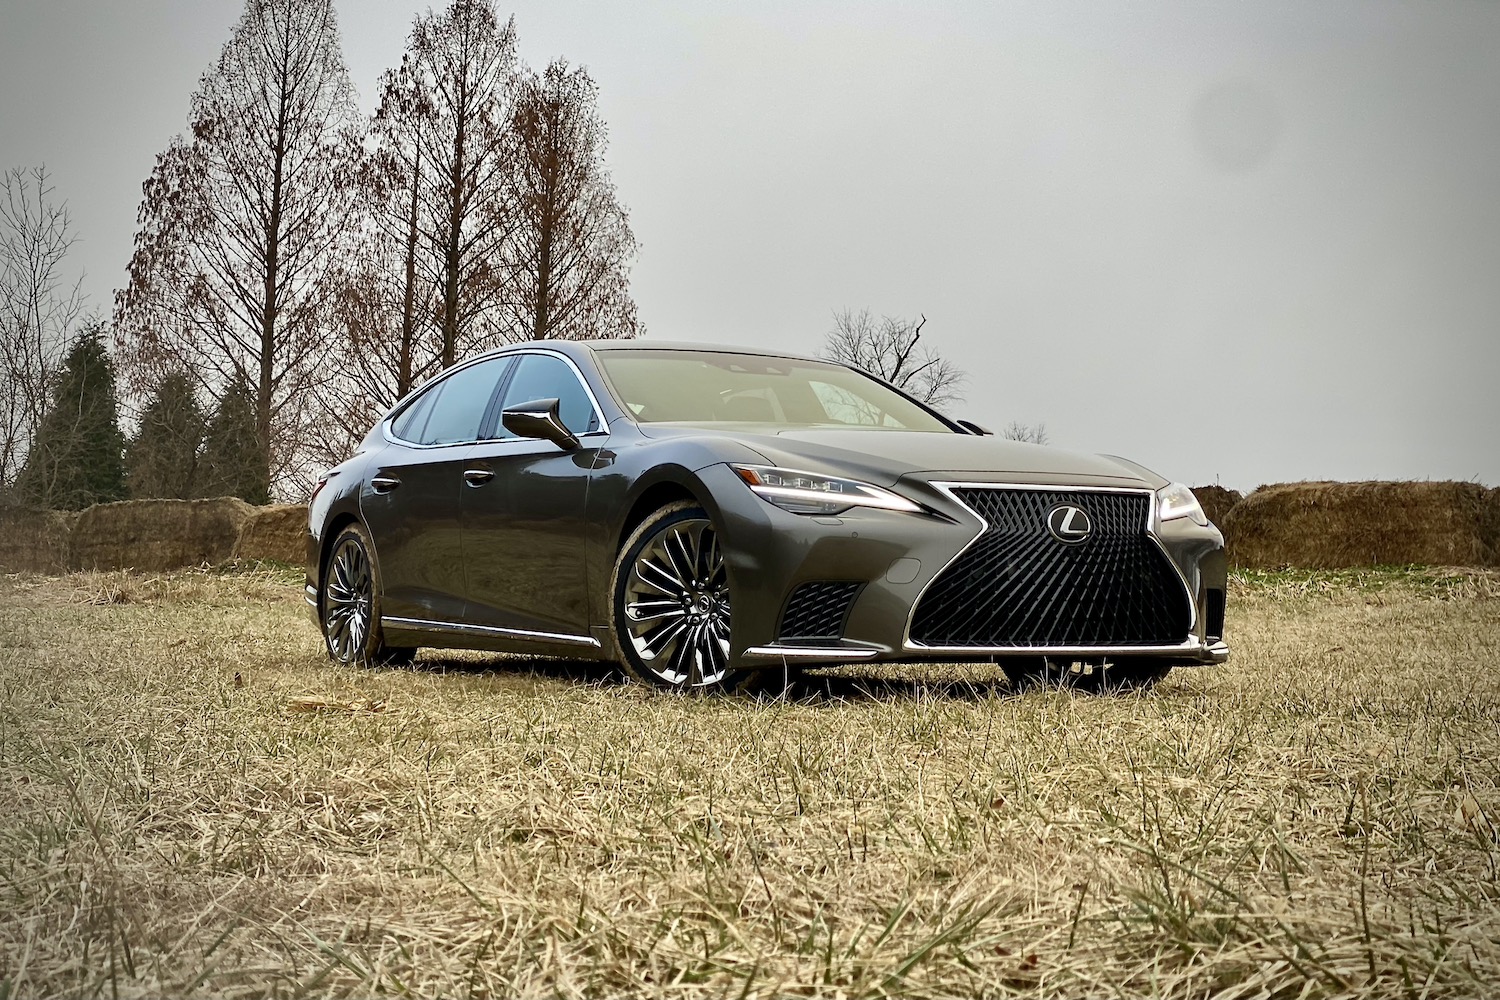 The 2021 Lexus LS500's front end from passenger's side in front of hay bales.